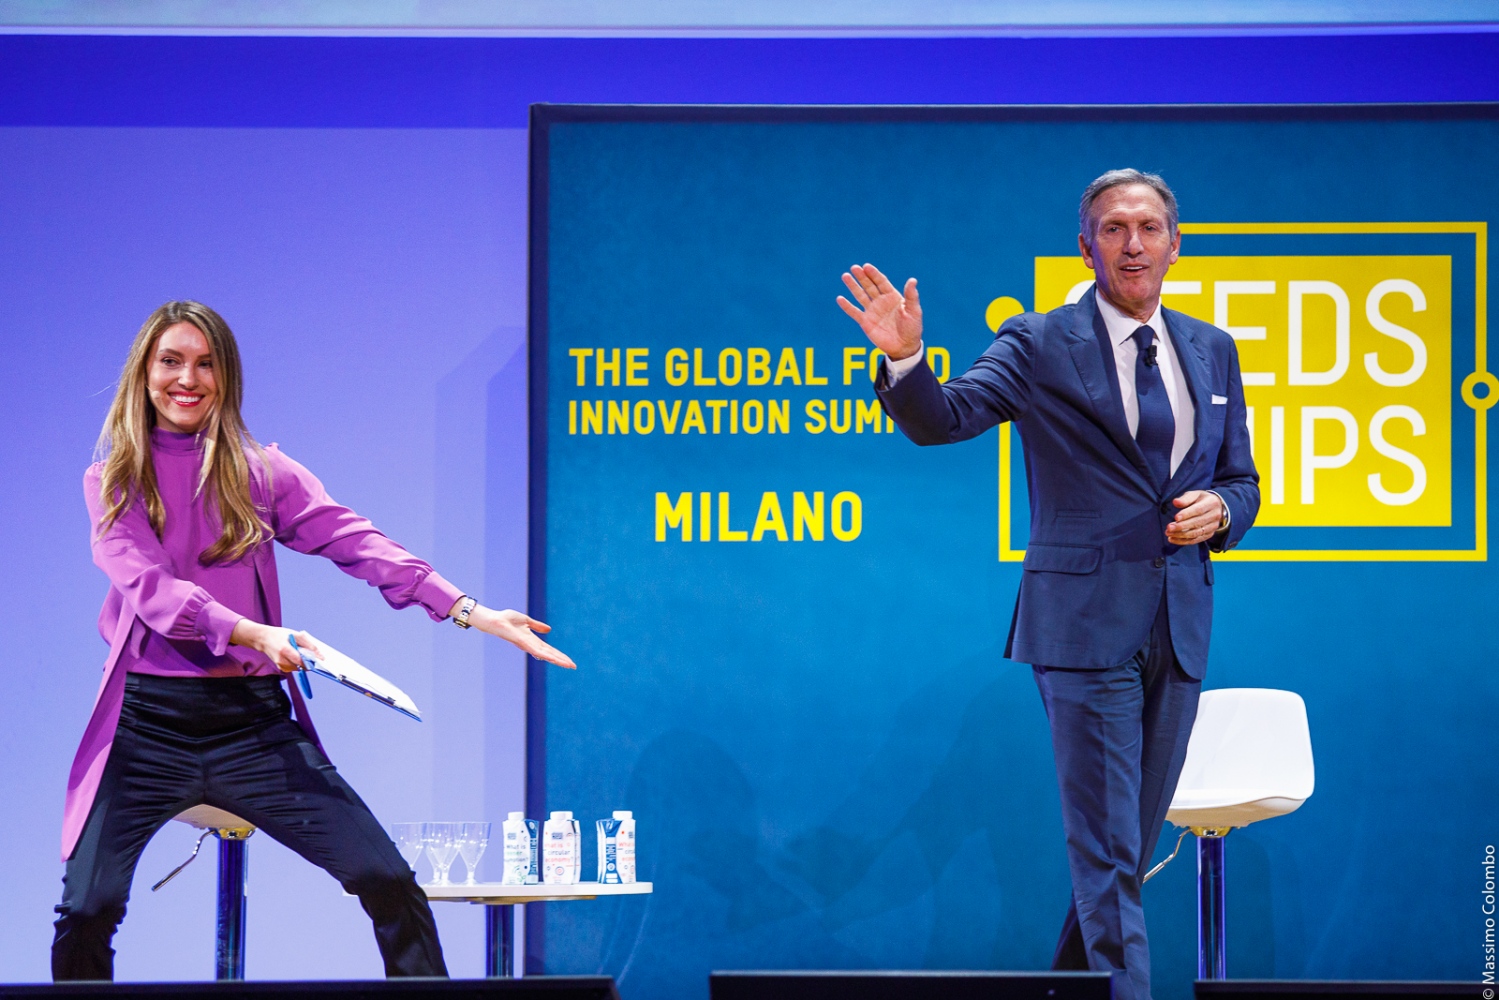 May 7, 2018, Milan Italy. I covered Seeds&Chips summit in Milan. In the pic Rachel Crane, CNN Innovation Correspondent, presents Howard Schultz, Executive Chairman of Starbucks.